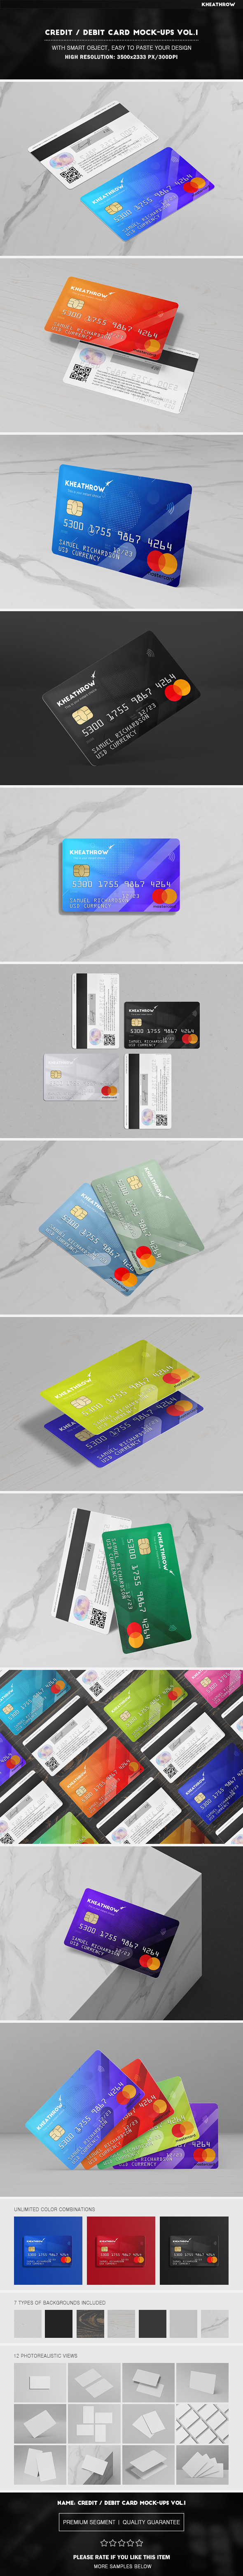 discount card banking money WALLET Payment card gift card Prepaid business card plastic card Mockup